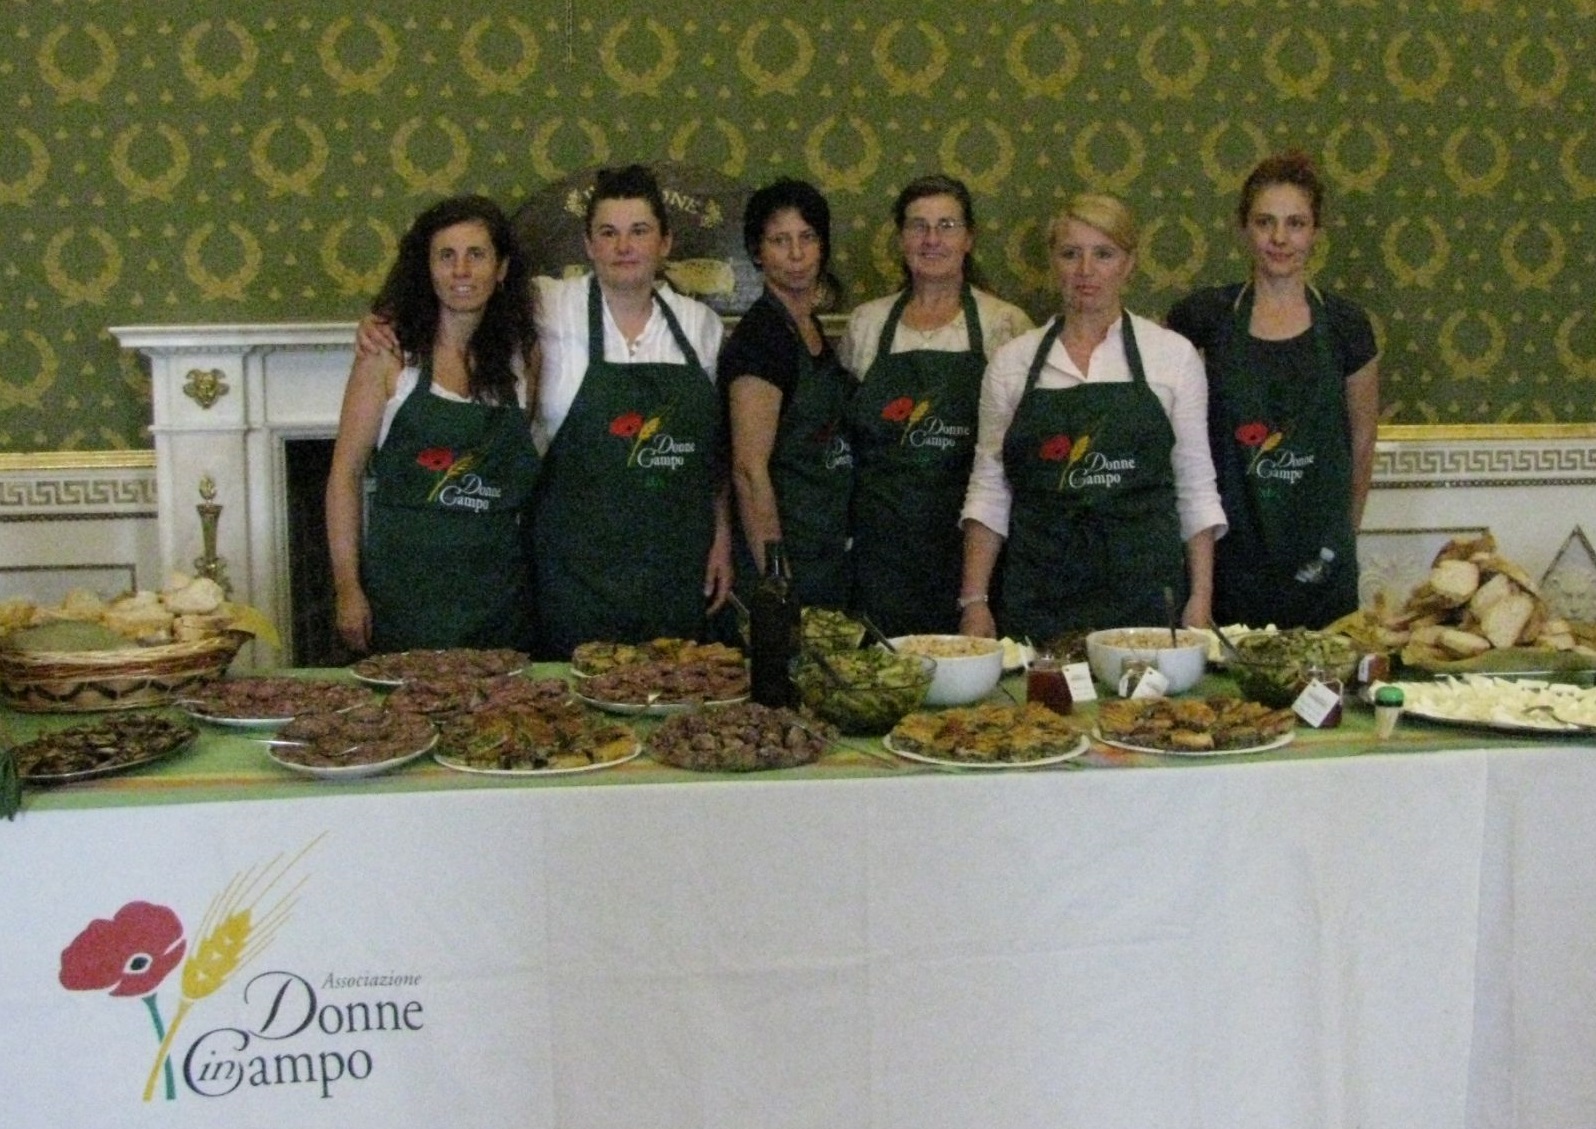 Agricatering Donne in Campo